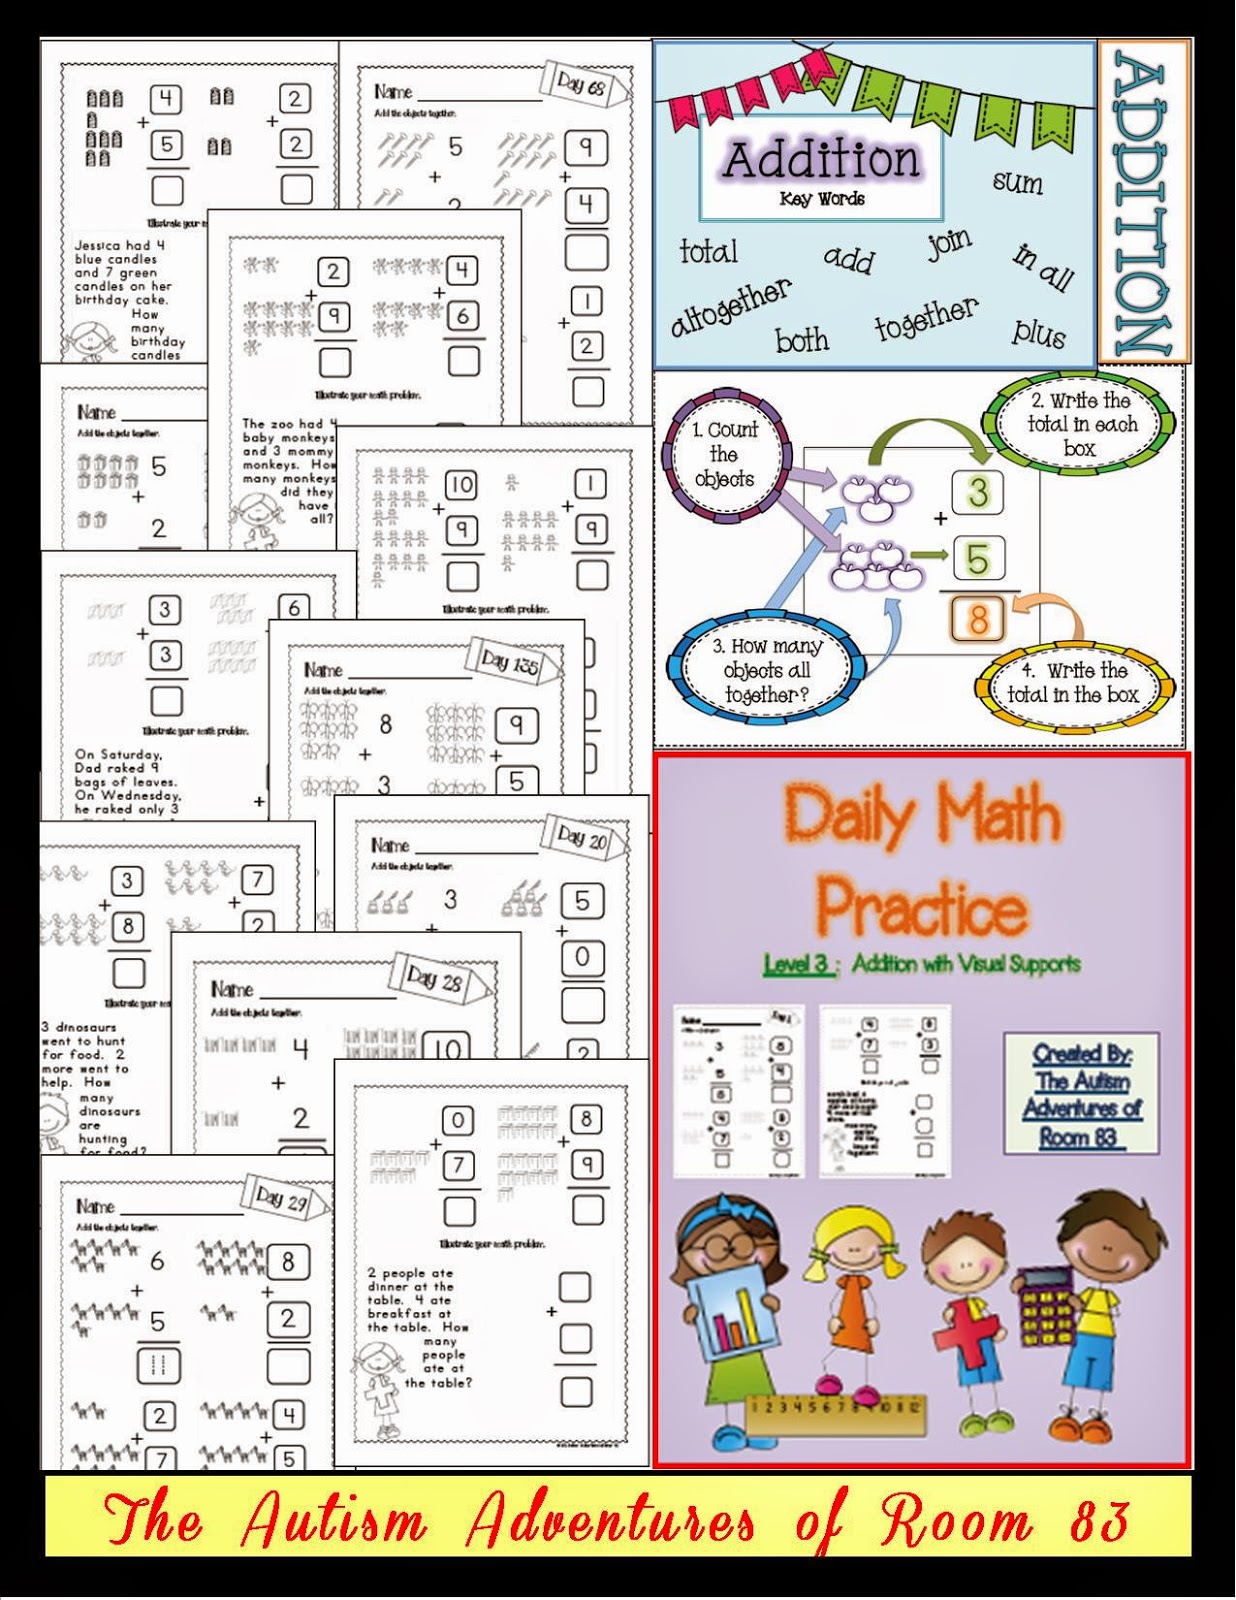 Daily Math Practice- Level 3 (Addition with Visuals) » Autism Adventures